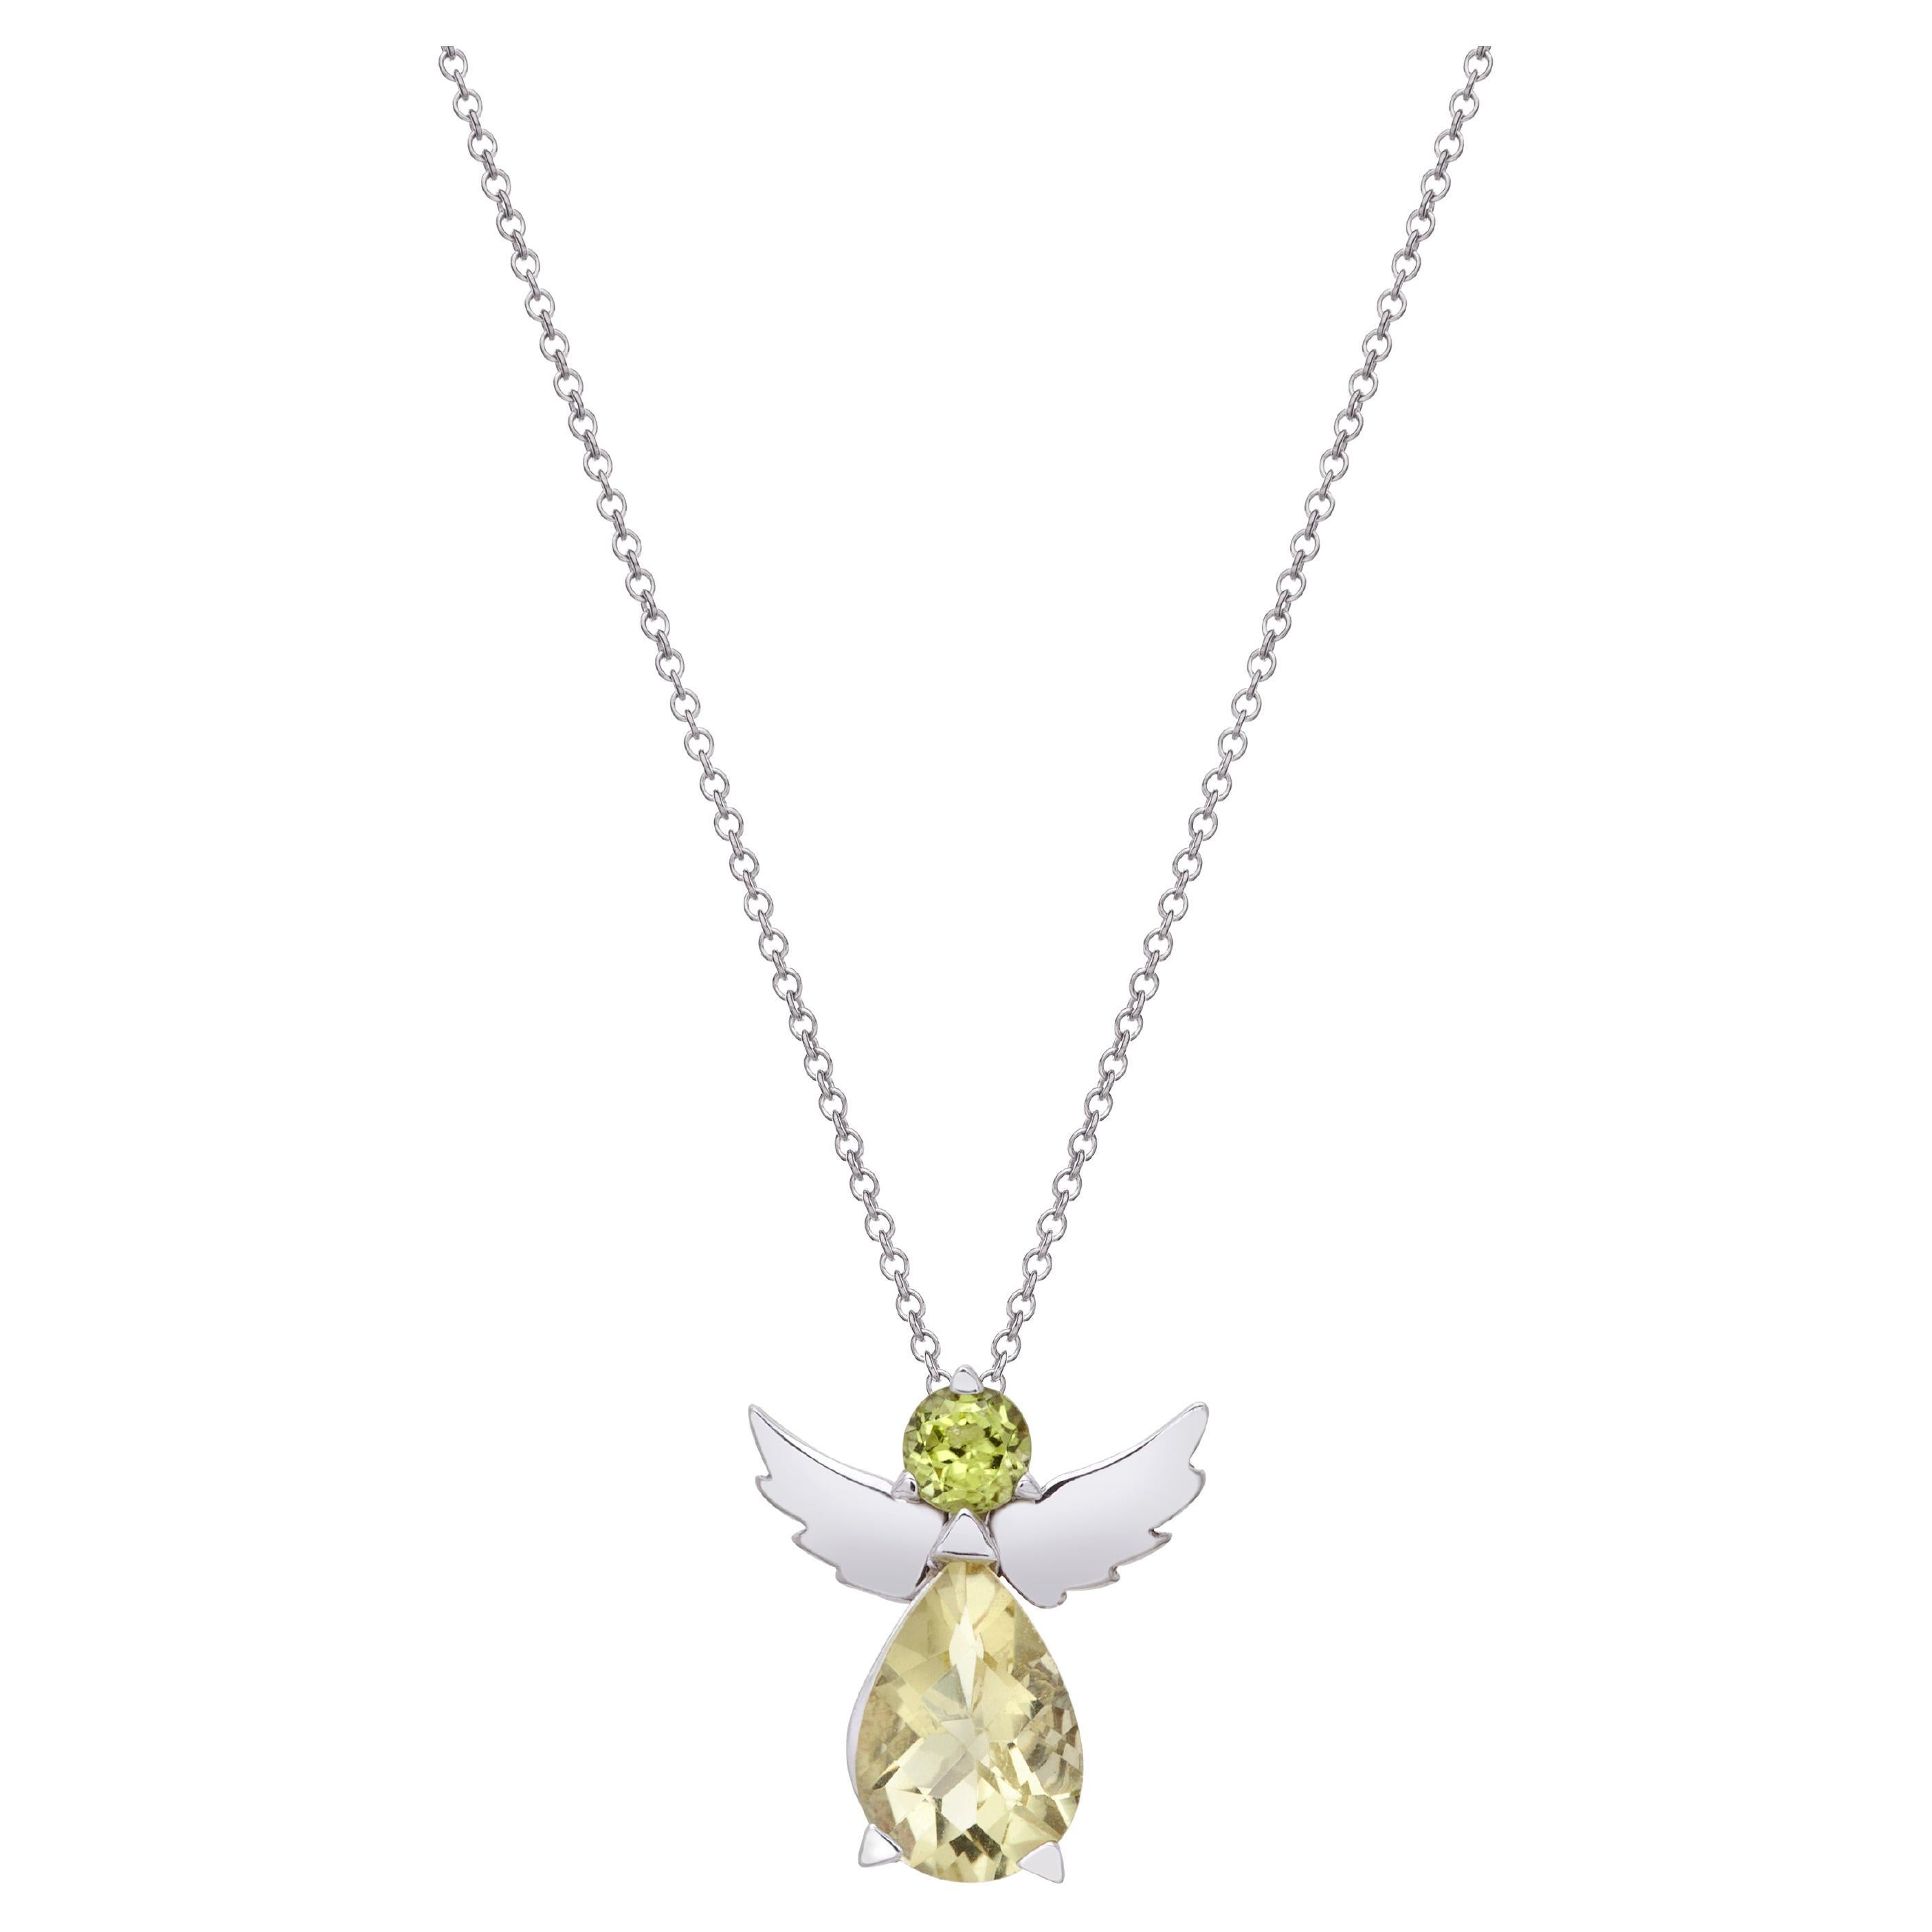 Angel Pendant Necklace in 18Kt White Gold with Green Peridot and Lemon Quartz For Sale